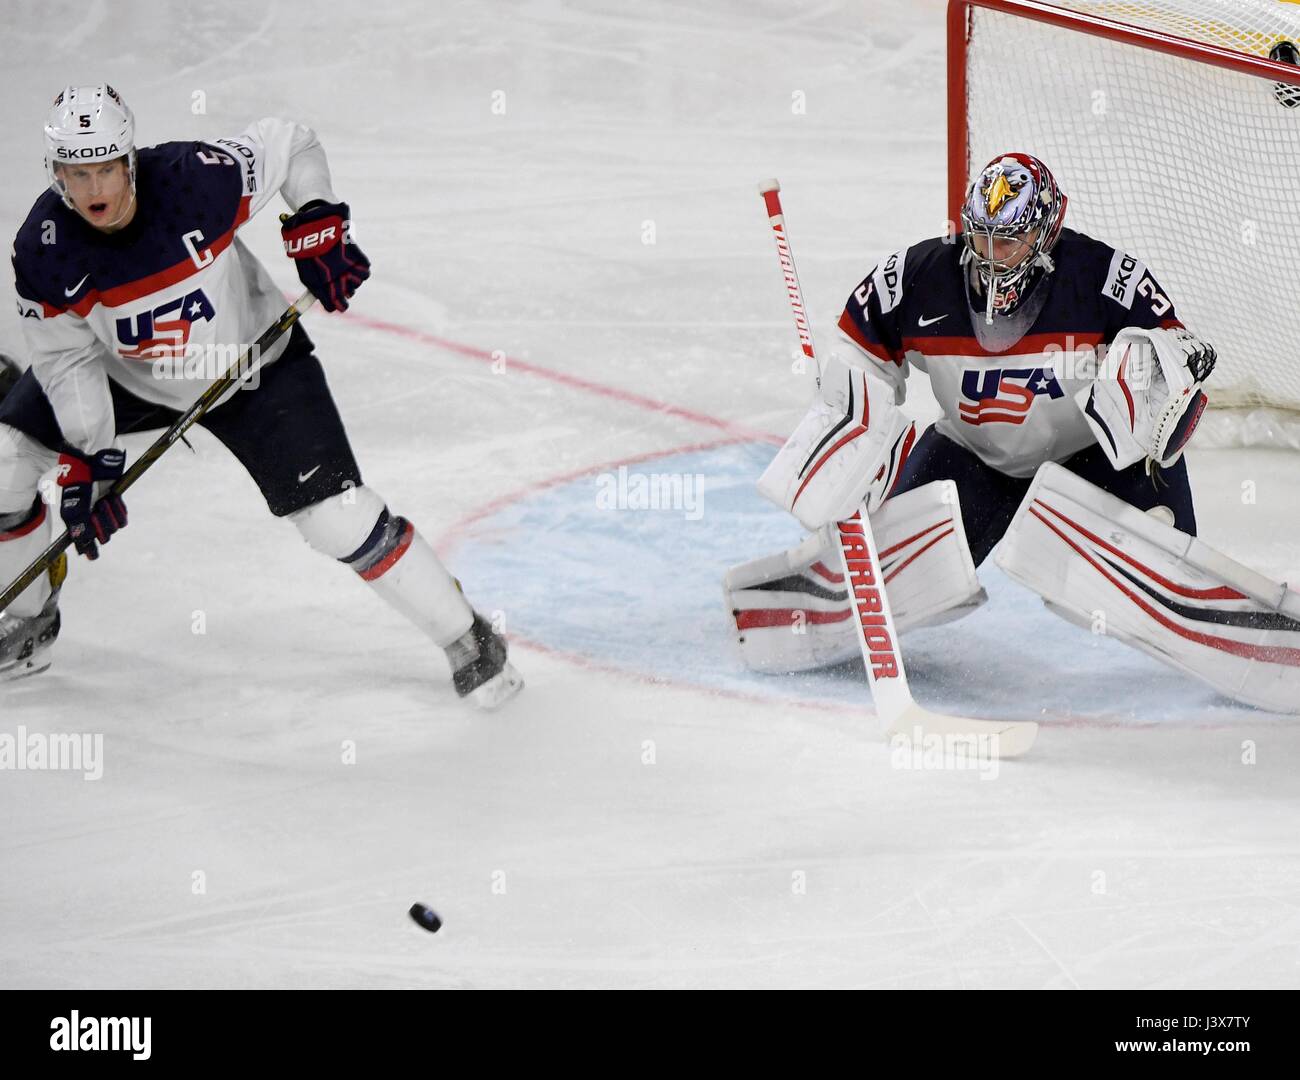 Cologne, Germany. 8th May, 2017. US goalkeeper Jimmy Howard catches the puck during the match between the USA and Sweden at the Ice Hockey World Championships at the Lanxess Arena in Cologne, Germany, 8 May 2017. Photo: Monika Skolimowska/dpa/Alamy Live News Stock Photo